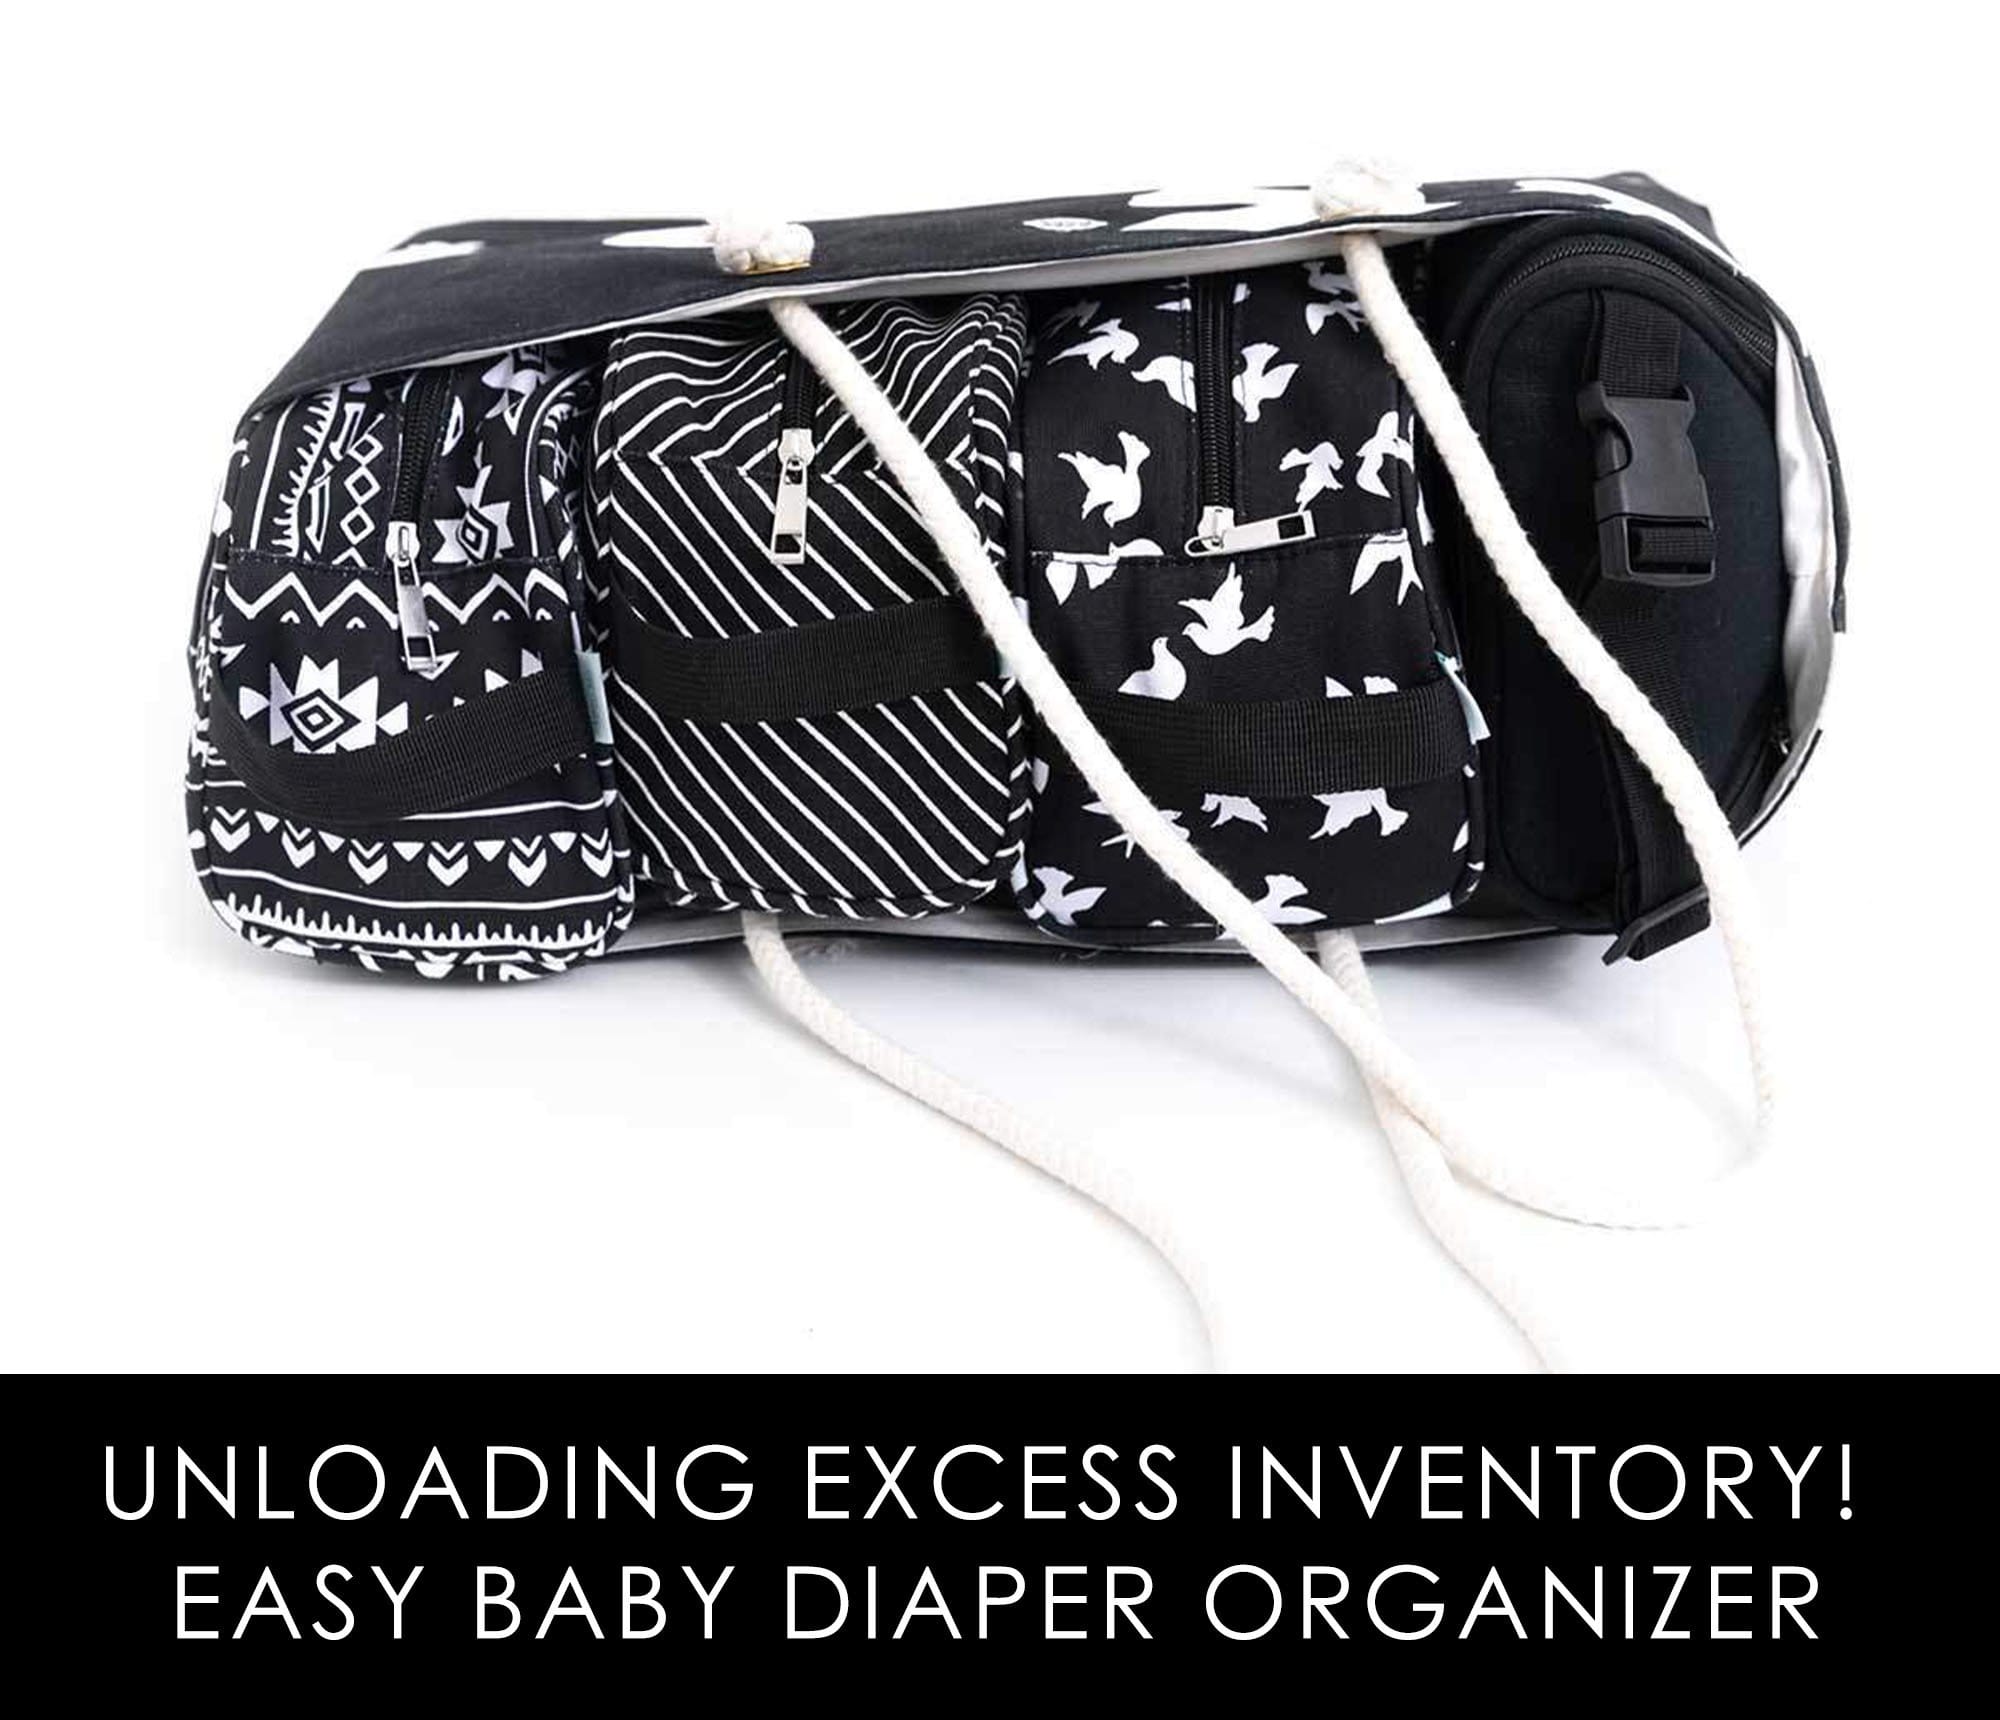 Mommy Bag Organizer Cute Embroidery Newborn Baby Diaper Bag Travel Stroller  Storage Packs for New Mothers and Expecting Moms